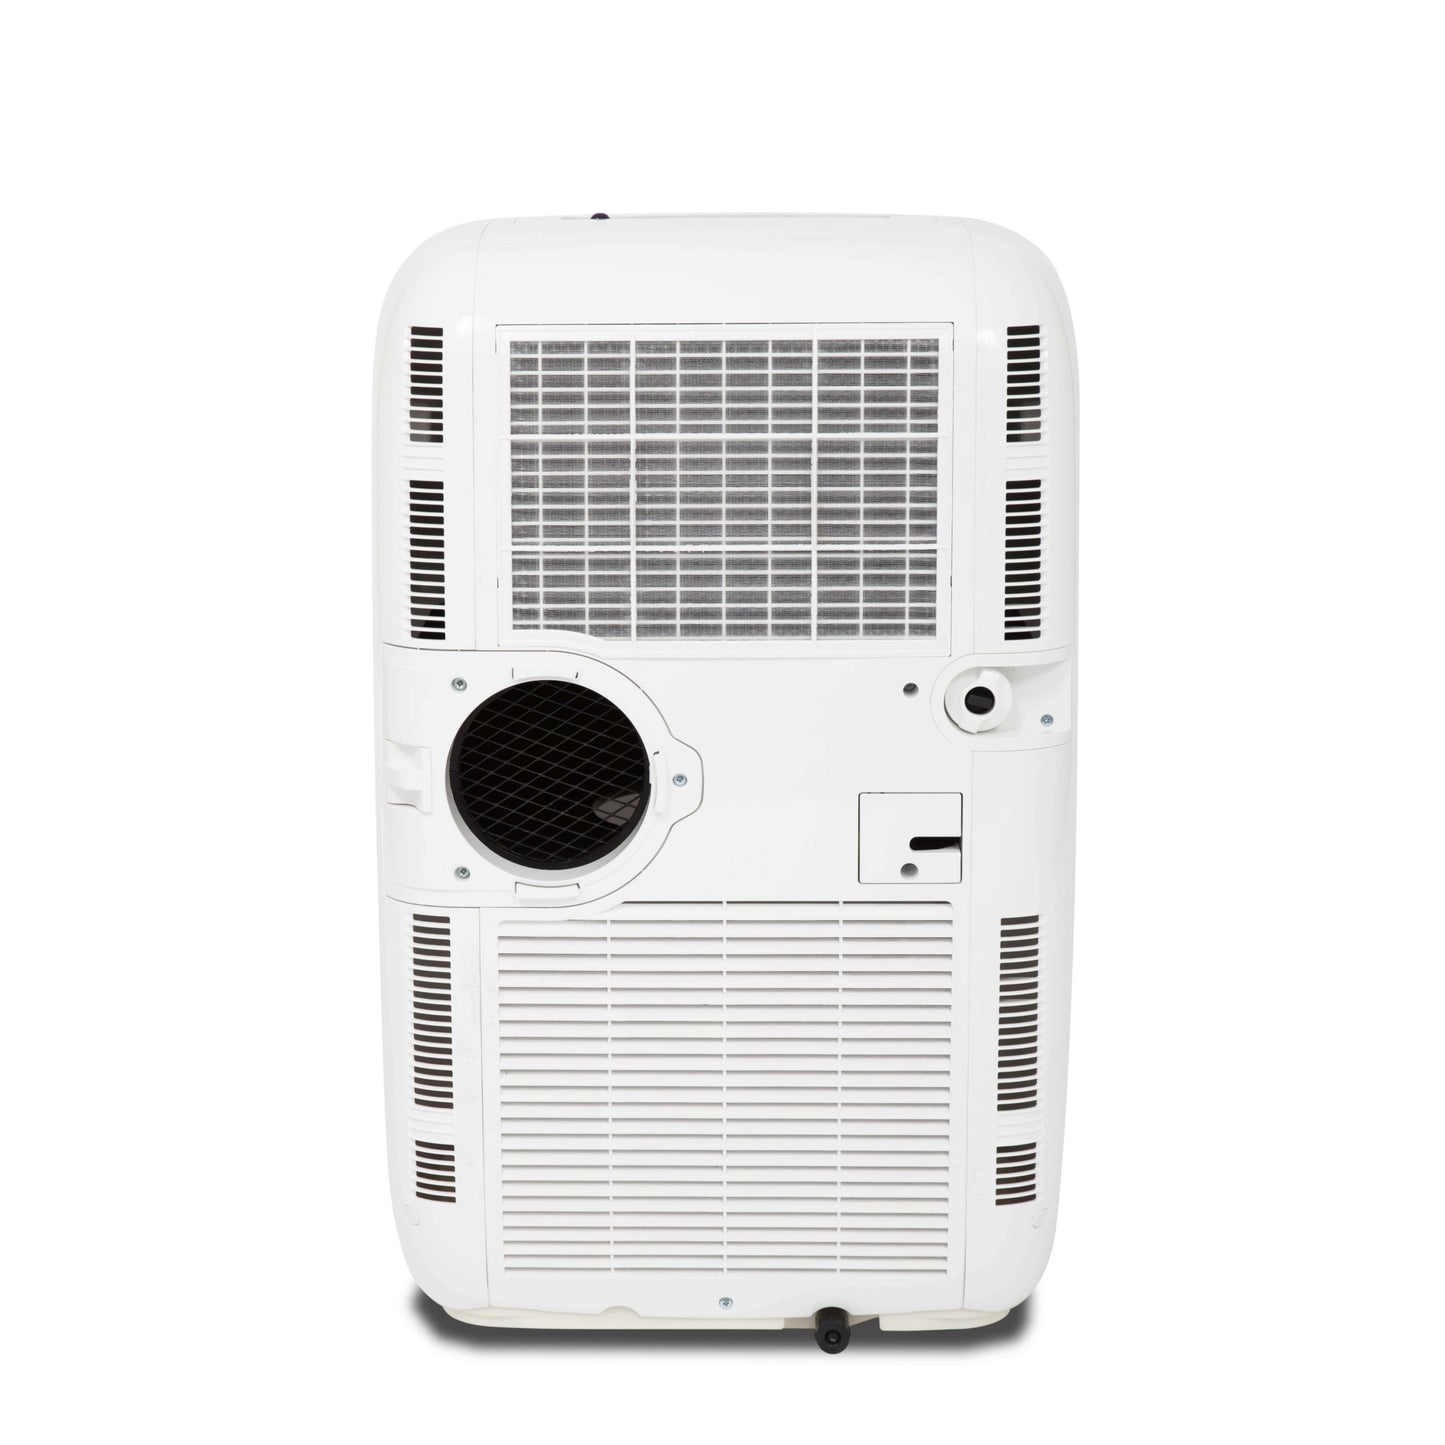 Whynter Air Conditioners Whynter ARC-101CW 10,000 BTU (5,200 BTU SACC) CoolSize Compact Portable Air Conditioner, Dehumidifier, and Fan with Activated Carbon Filter up to 300 sq ft